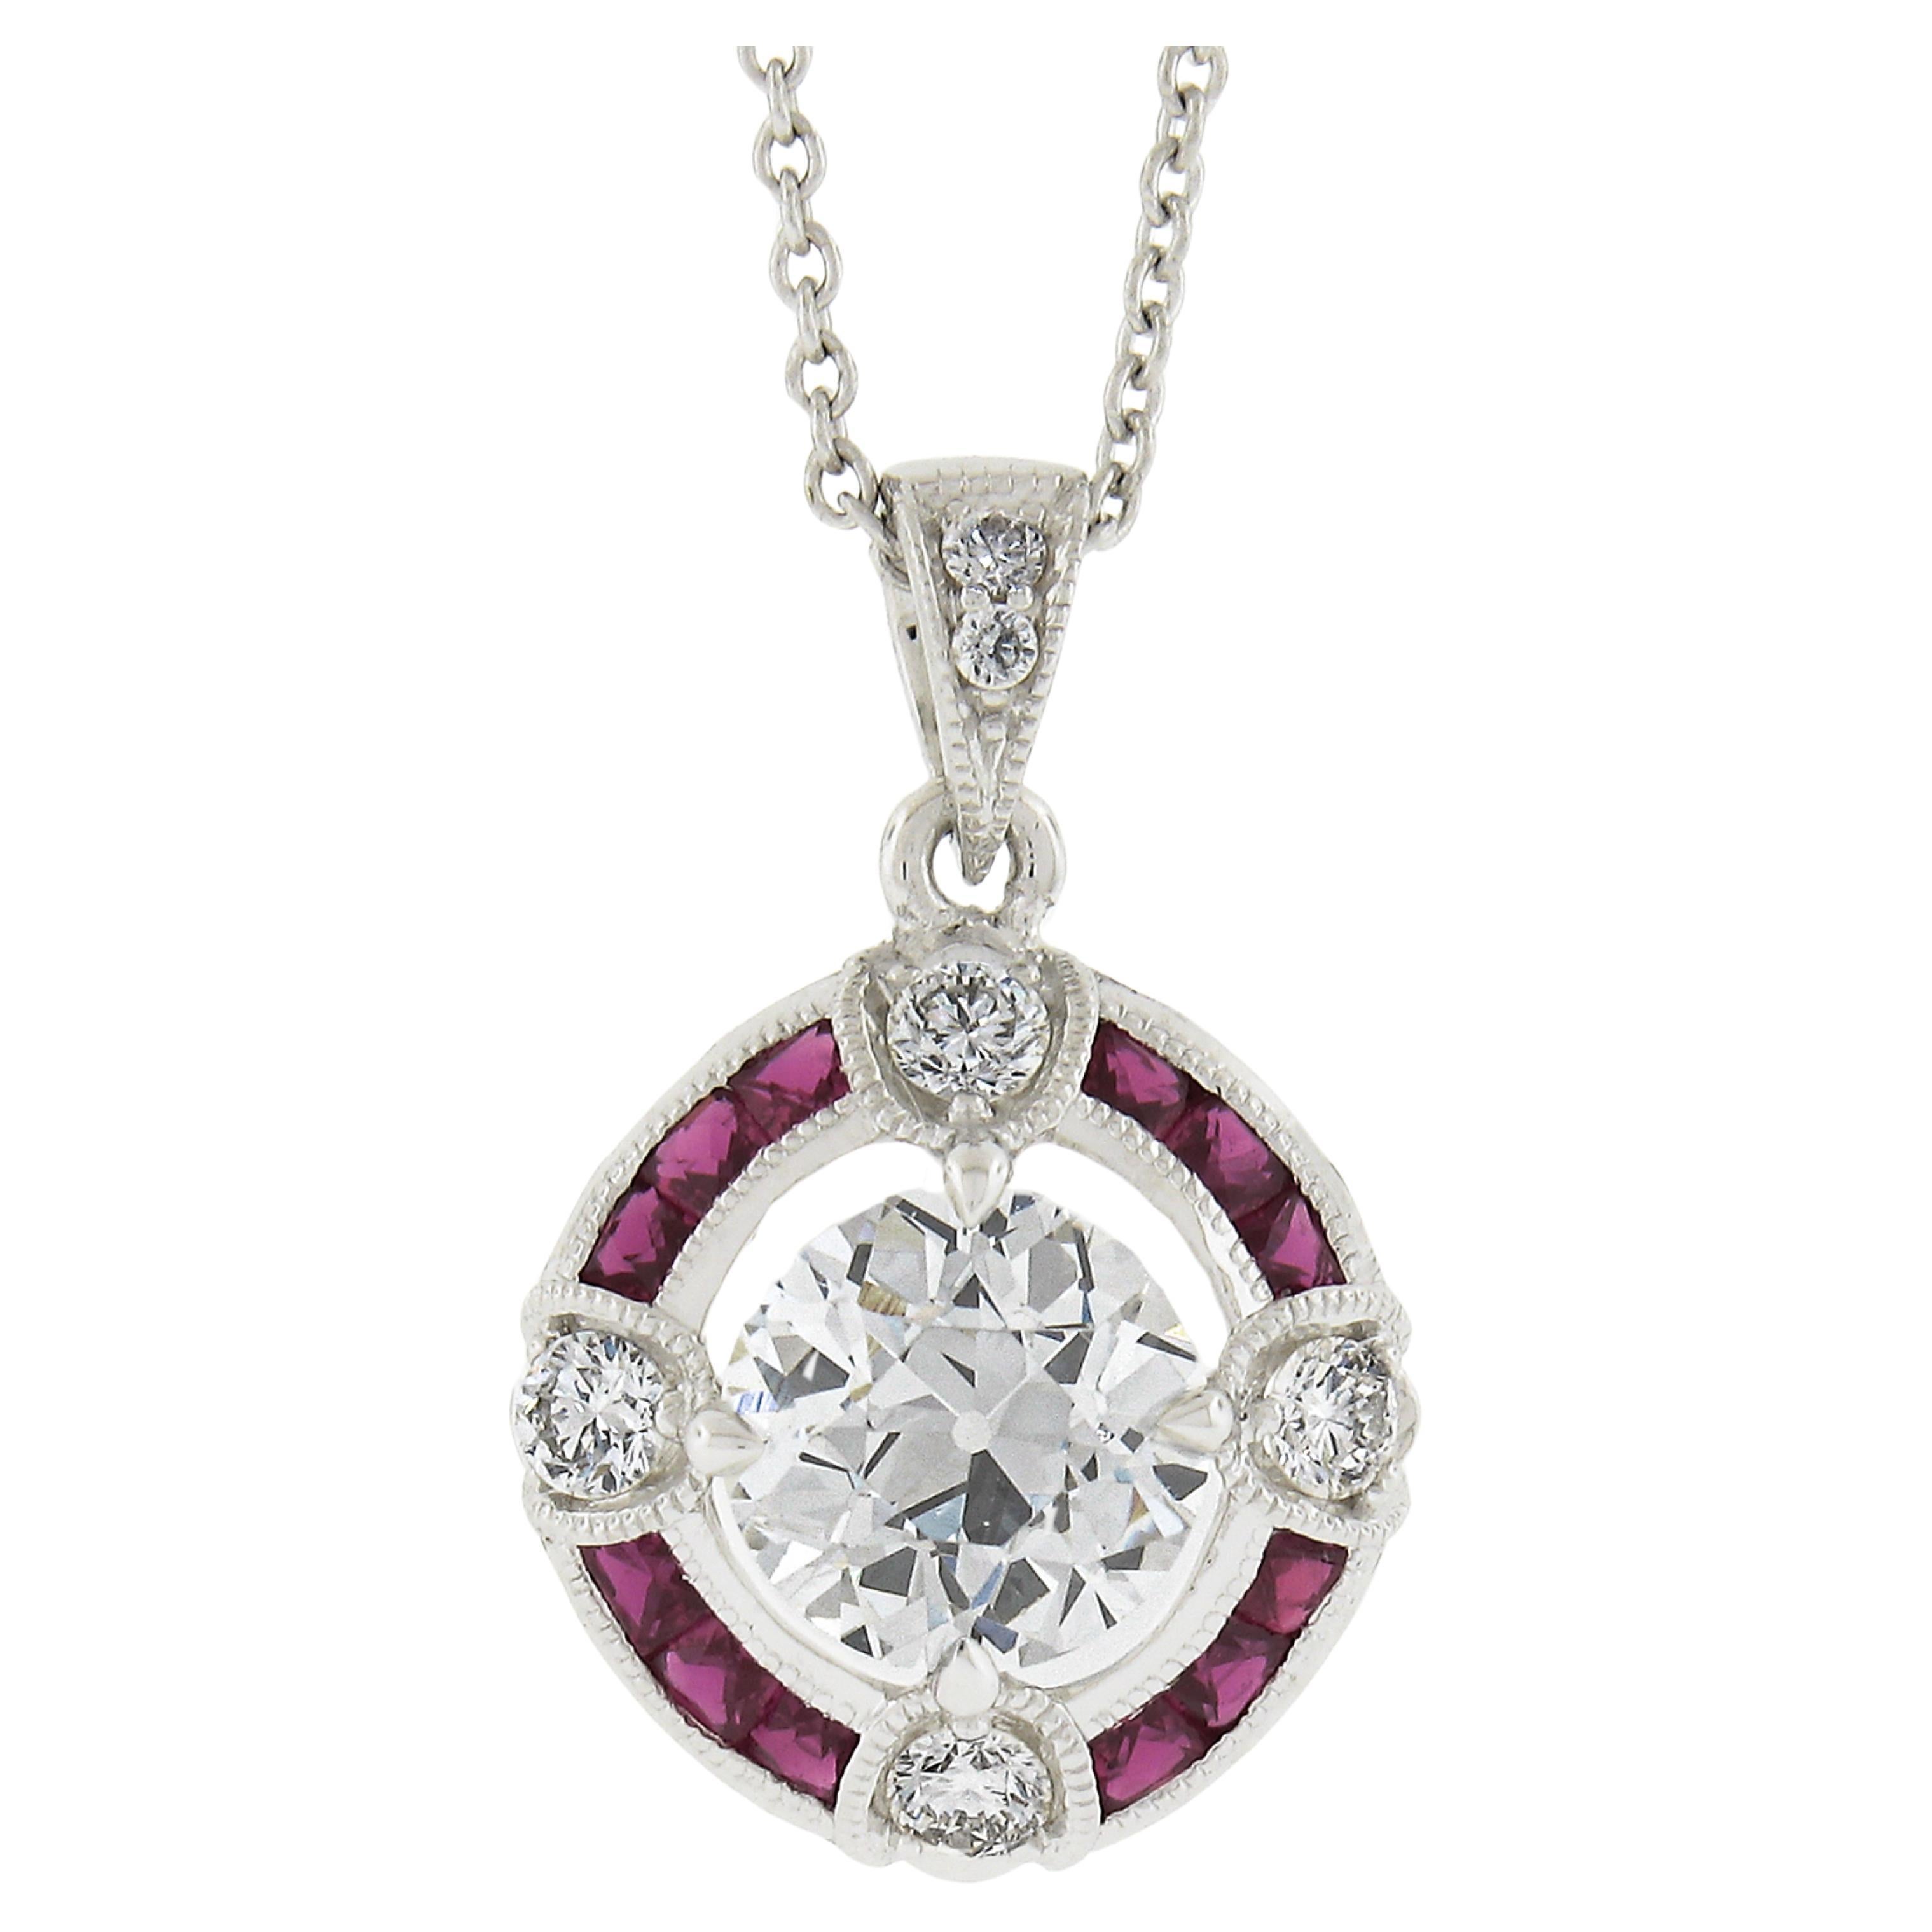 Antique 14k White Gold Gia Old Diamond W/ Ruby Target Pendant on New 18" Chain For Sale